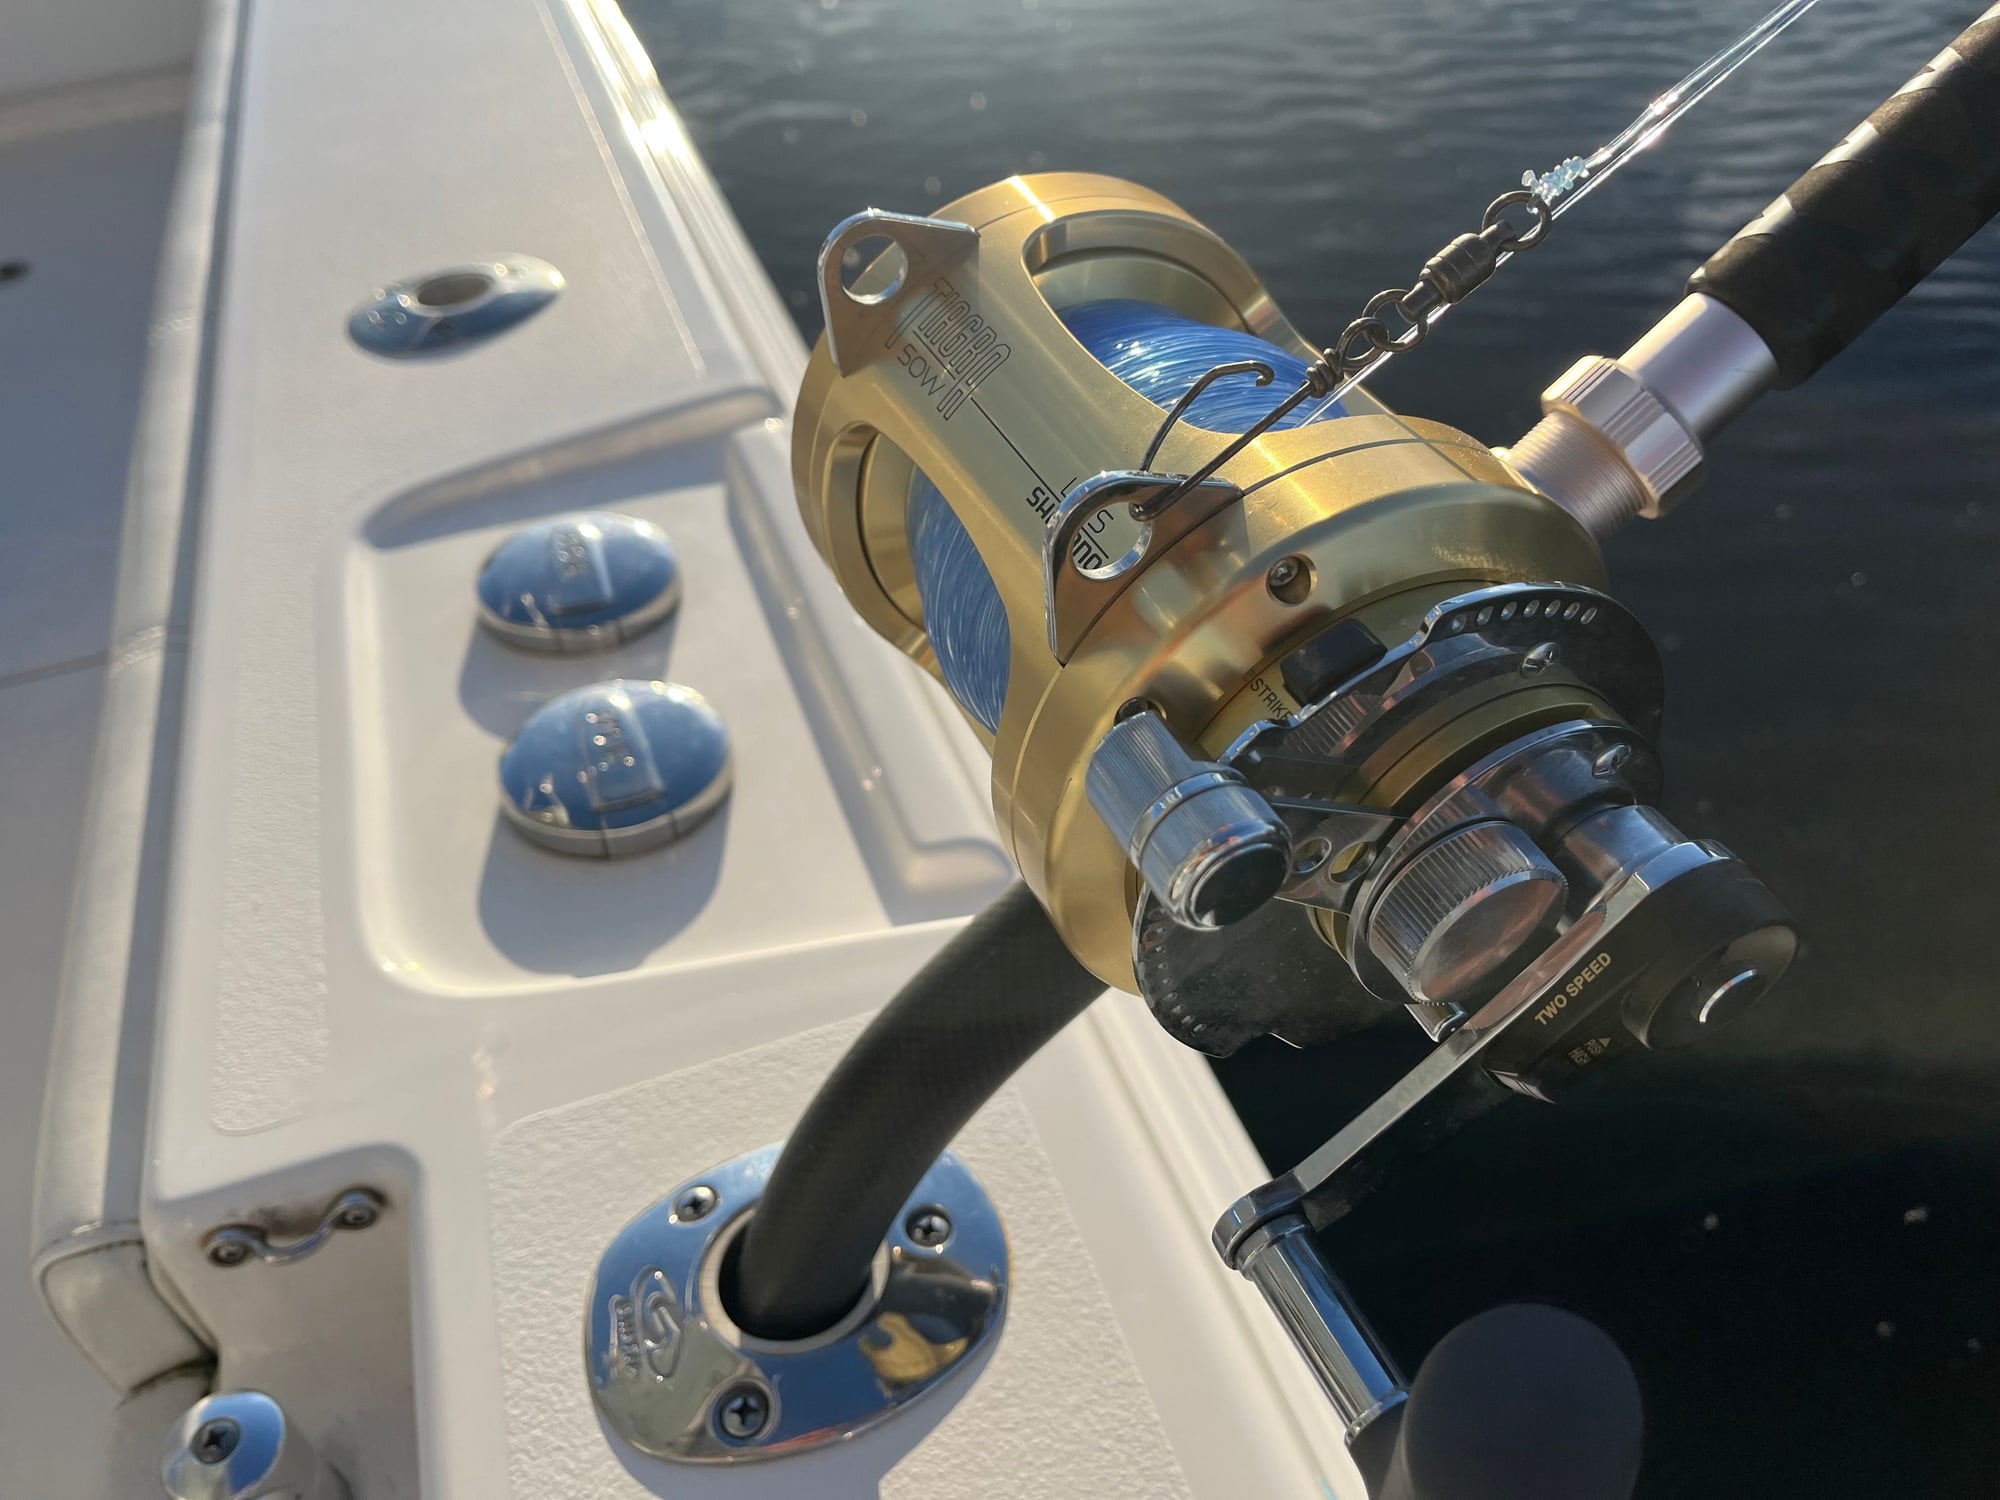 Tiagra 50 WLRSA w/ Crowder Rods (2) - The Hull Truth - Boating and Fishing  Forum